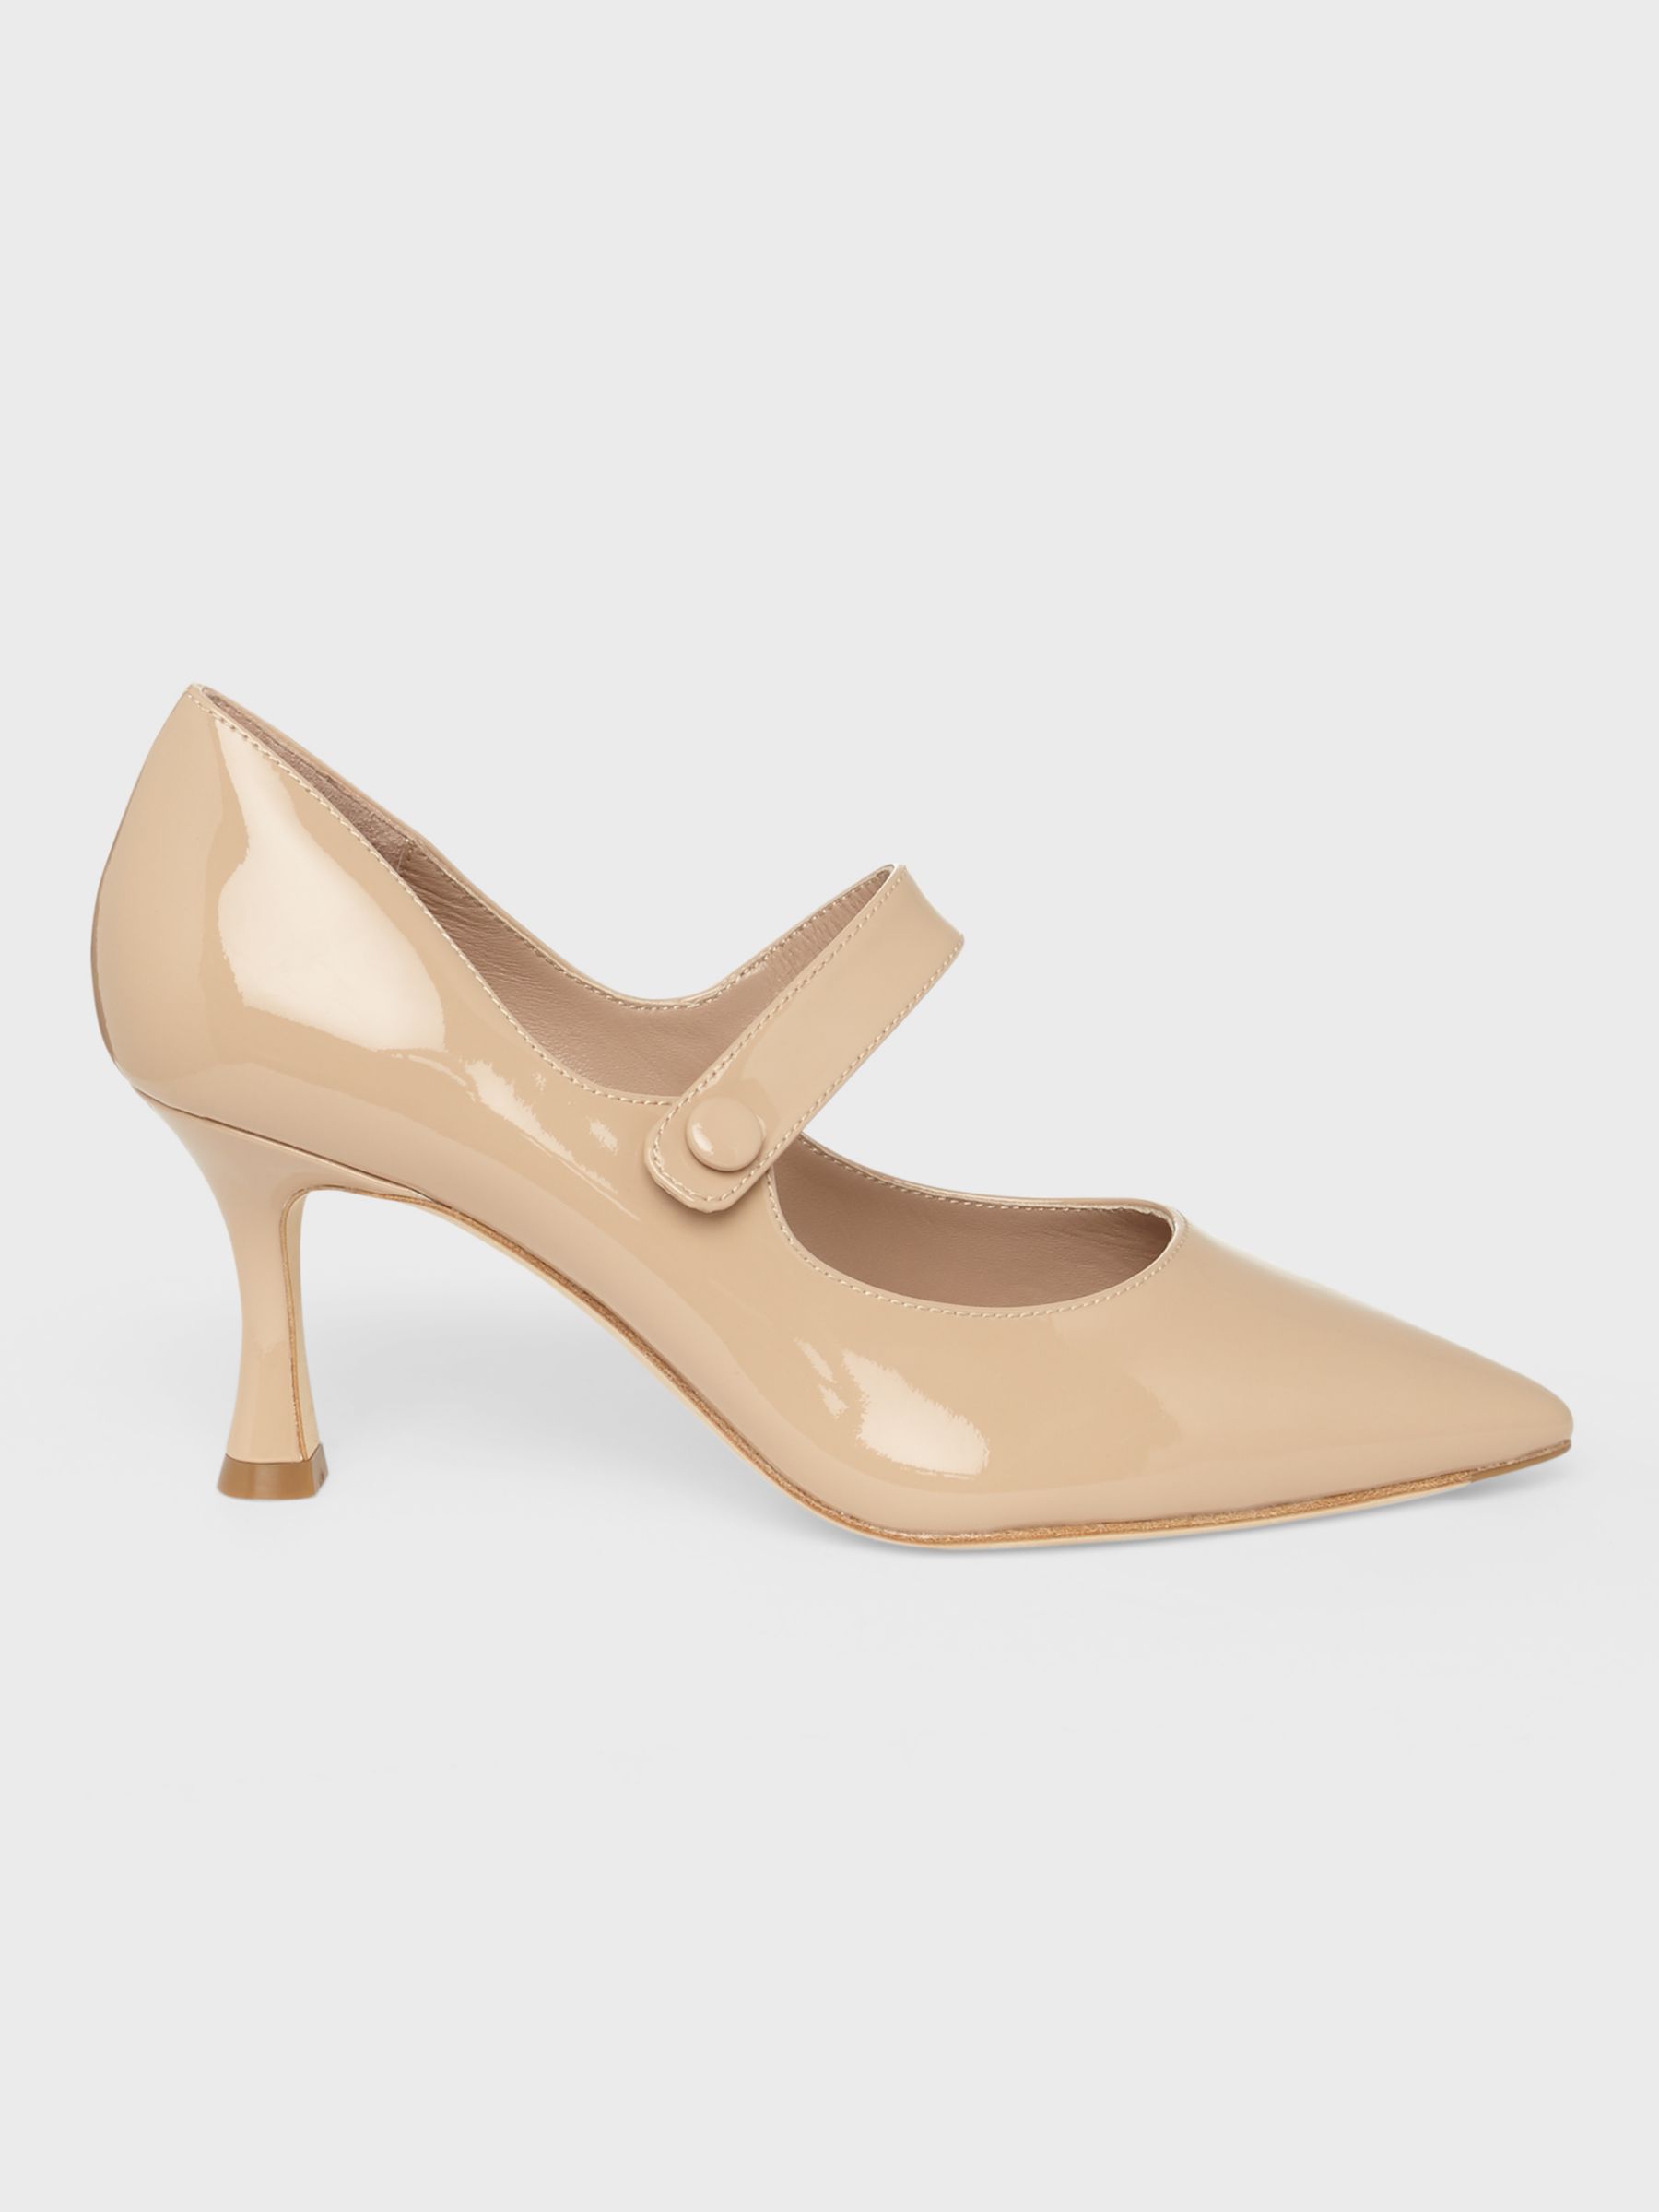 Hobbs Sandra Patent Leather Stiletto Court Shoes, Fawn at John Lewis ...